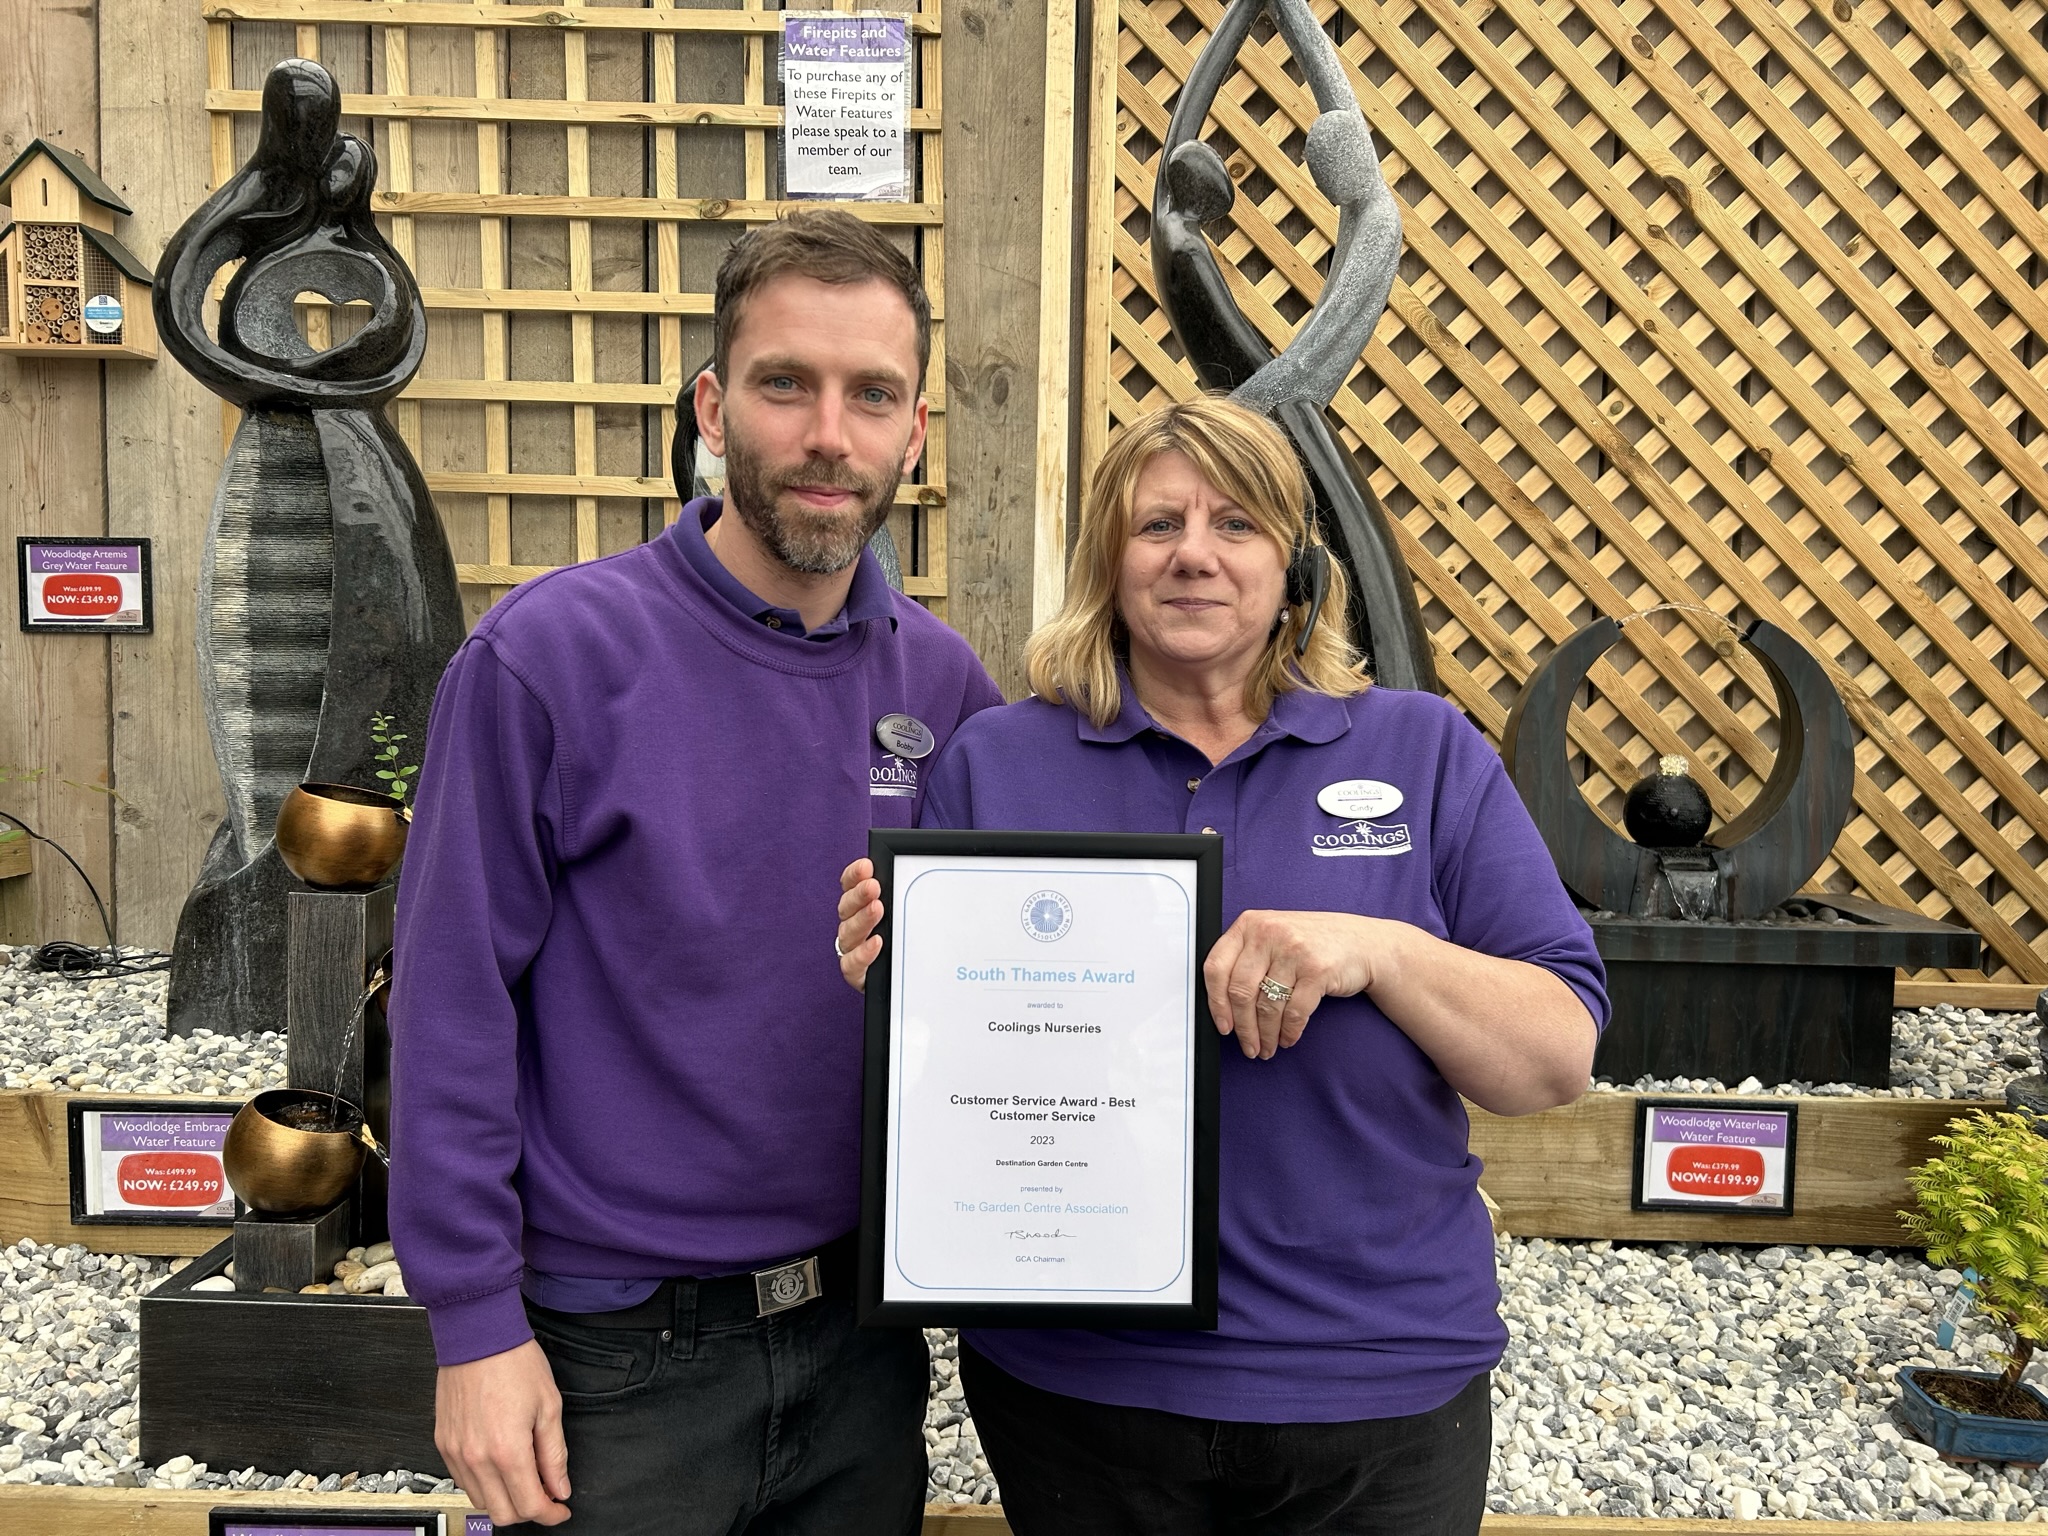 Bobby Brown, Assistant Manager and Cindy Brown, Shop Manager at The Gardener's Garden Centre